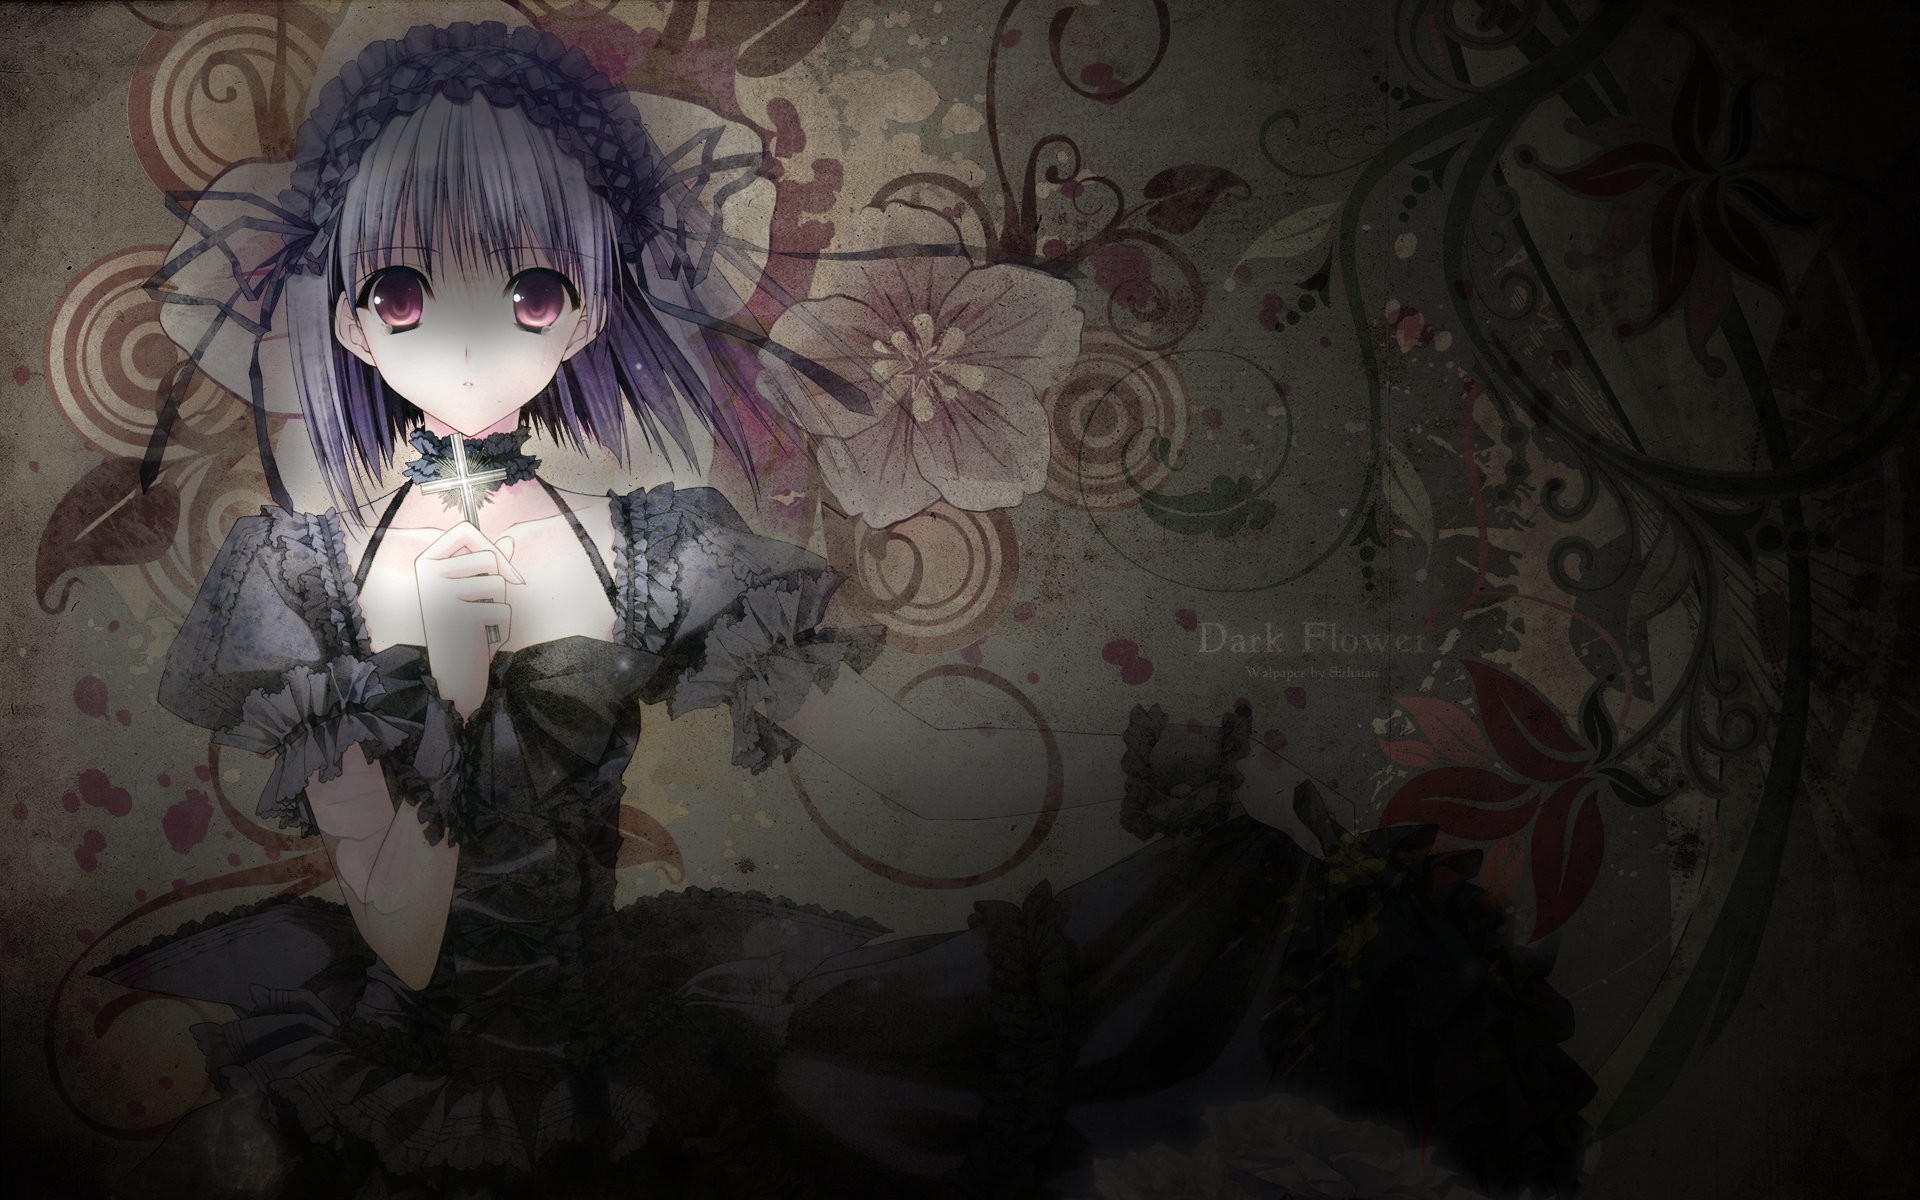 1920x1200 gothic anime wallpapers hd hd wallpapers download free artwork background  wallpapers samsung phone wallpapers widescreen 1080p 1920Ã1200 Wallpaper HD